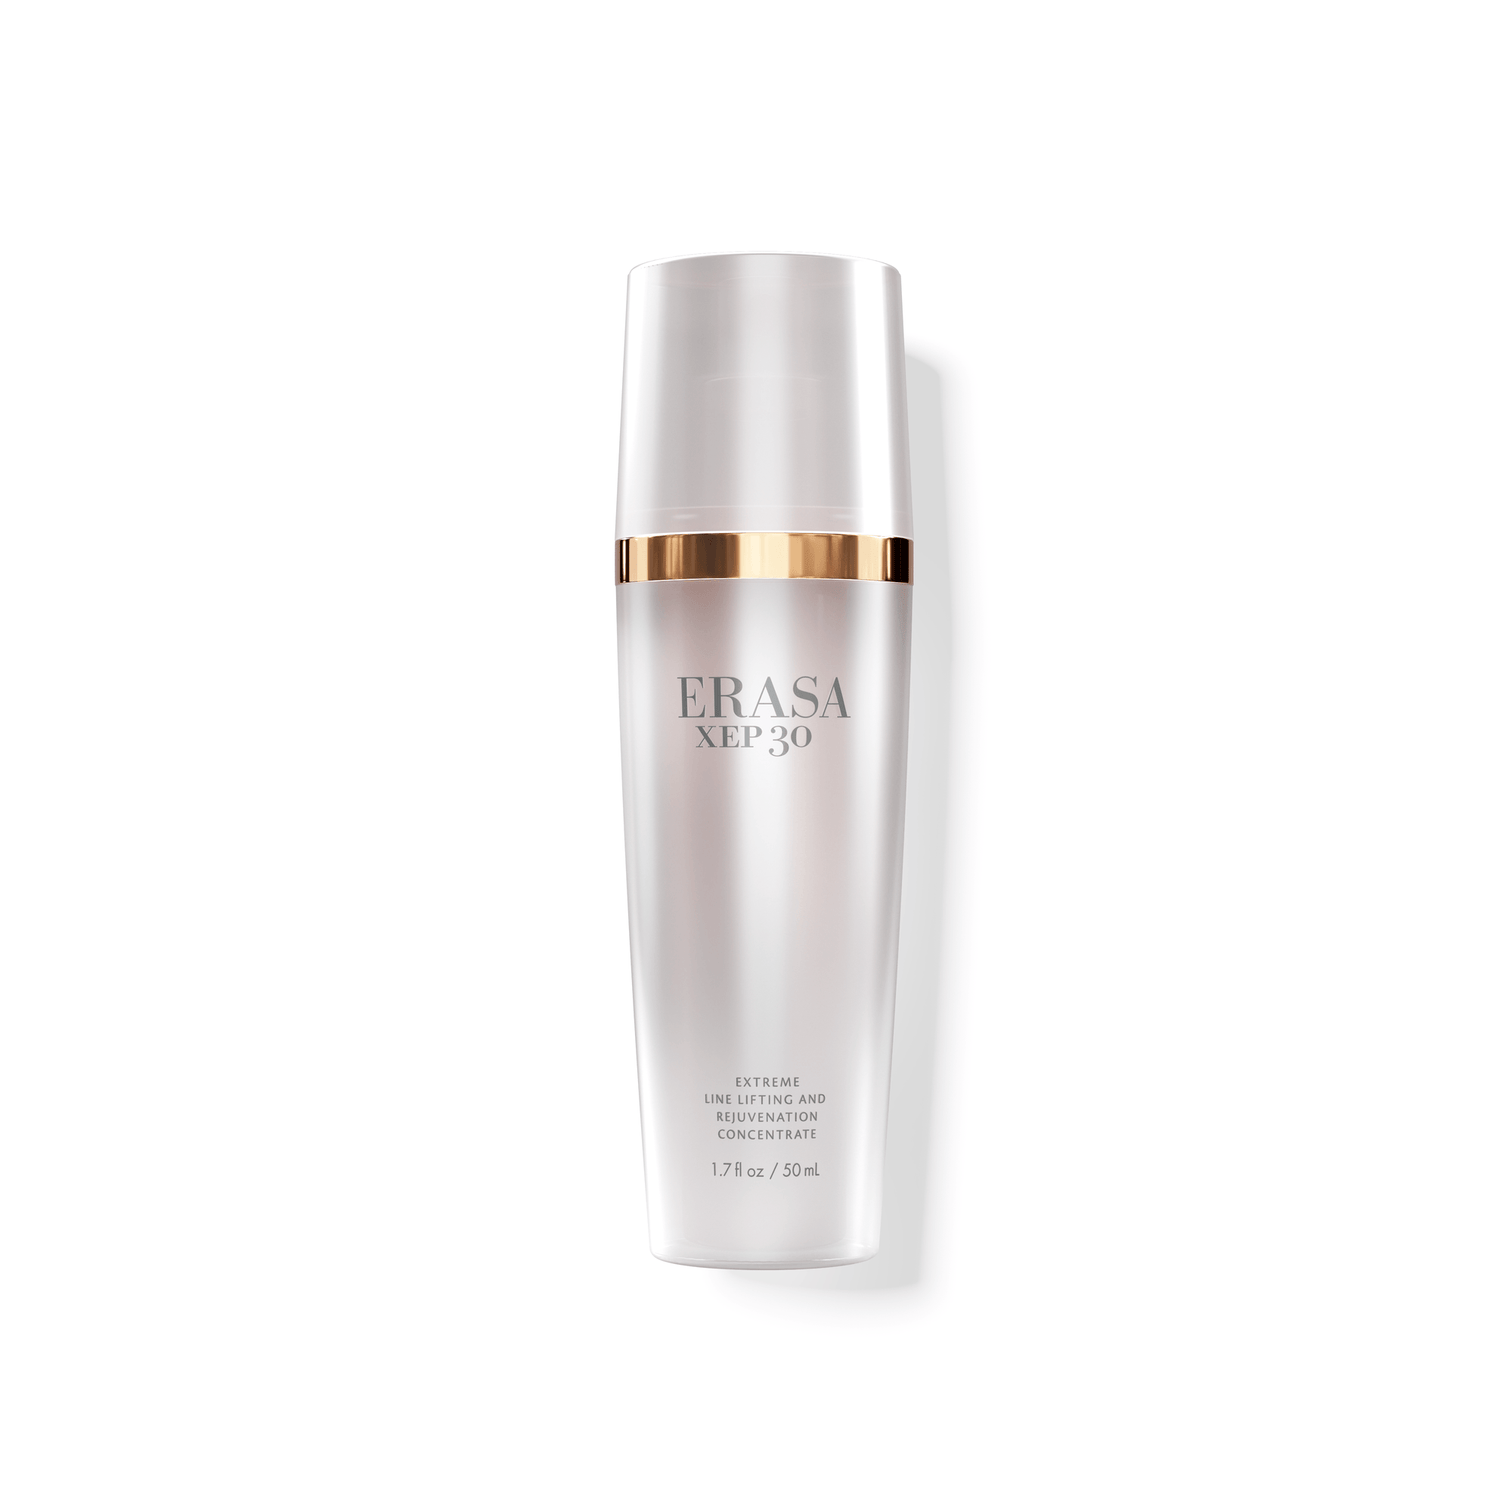 Erasa XEP 30 Extreme Line Lifting And Rejuvenation Concentrate